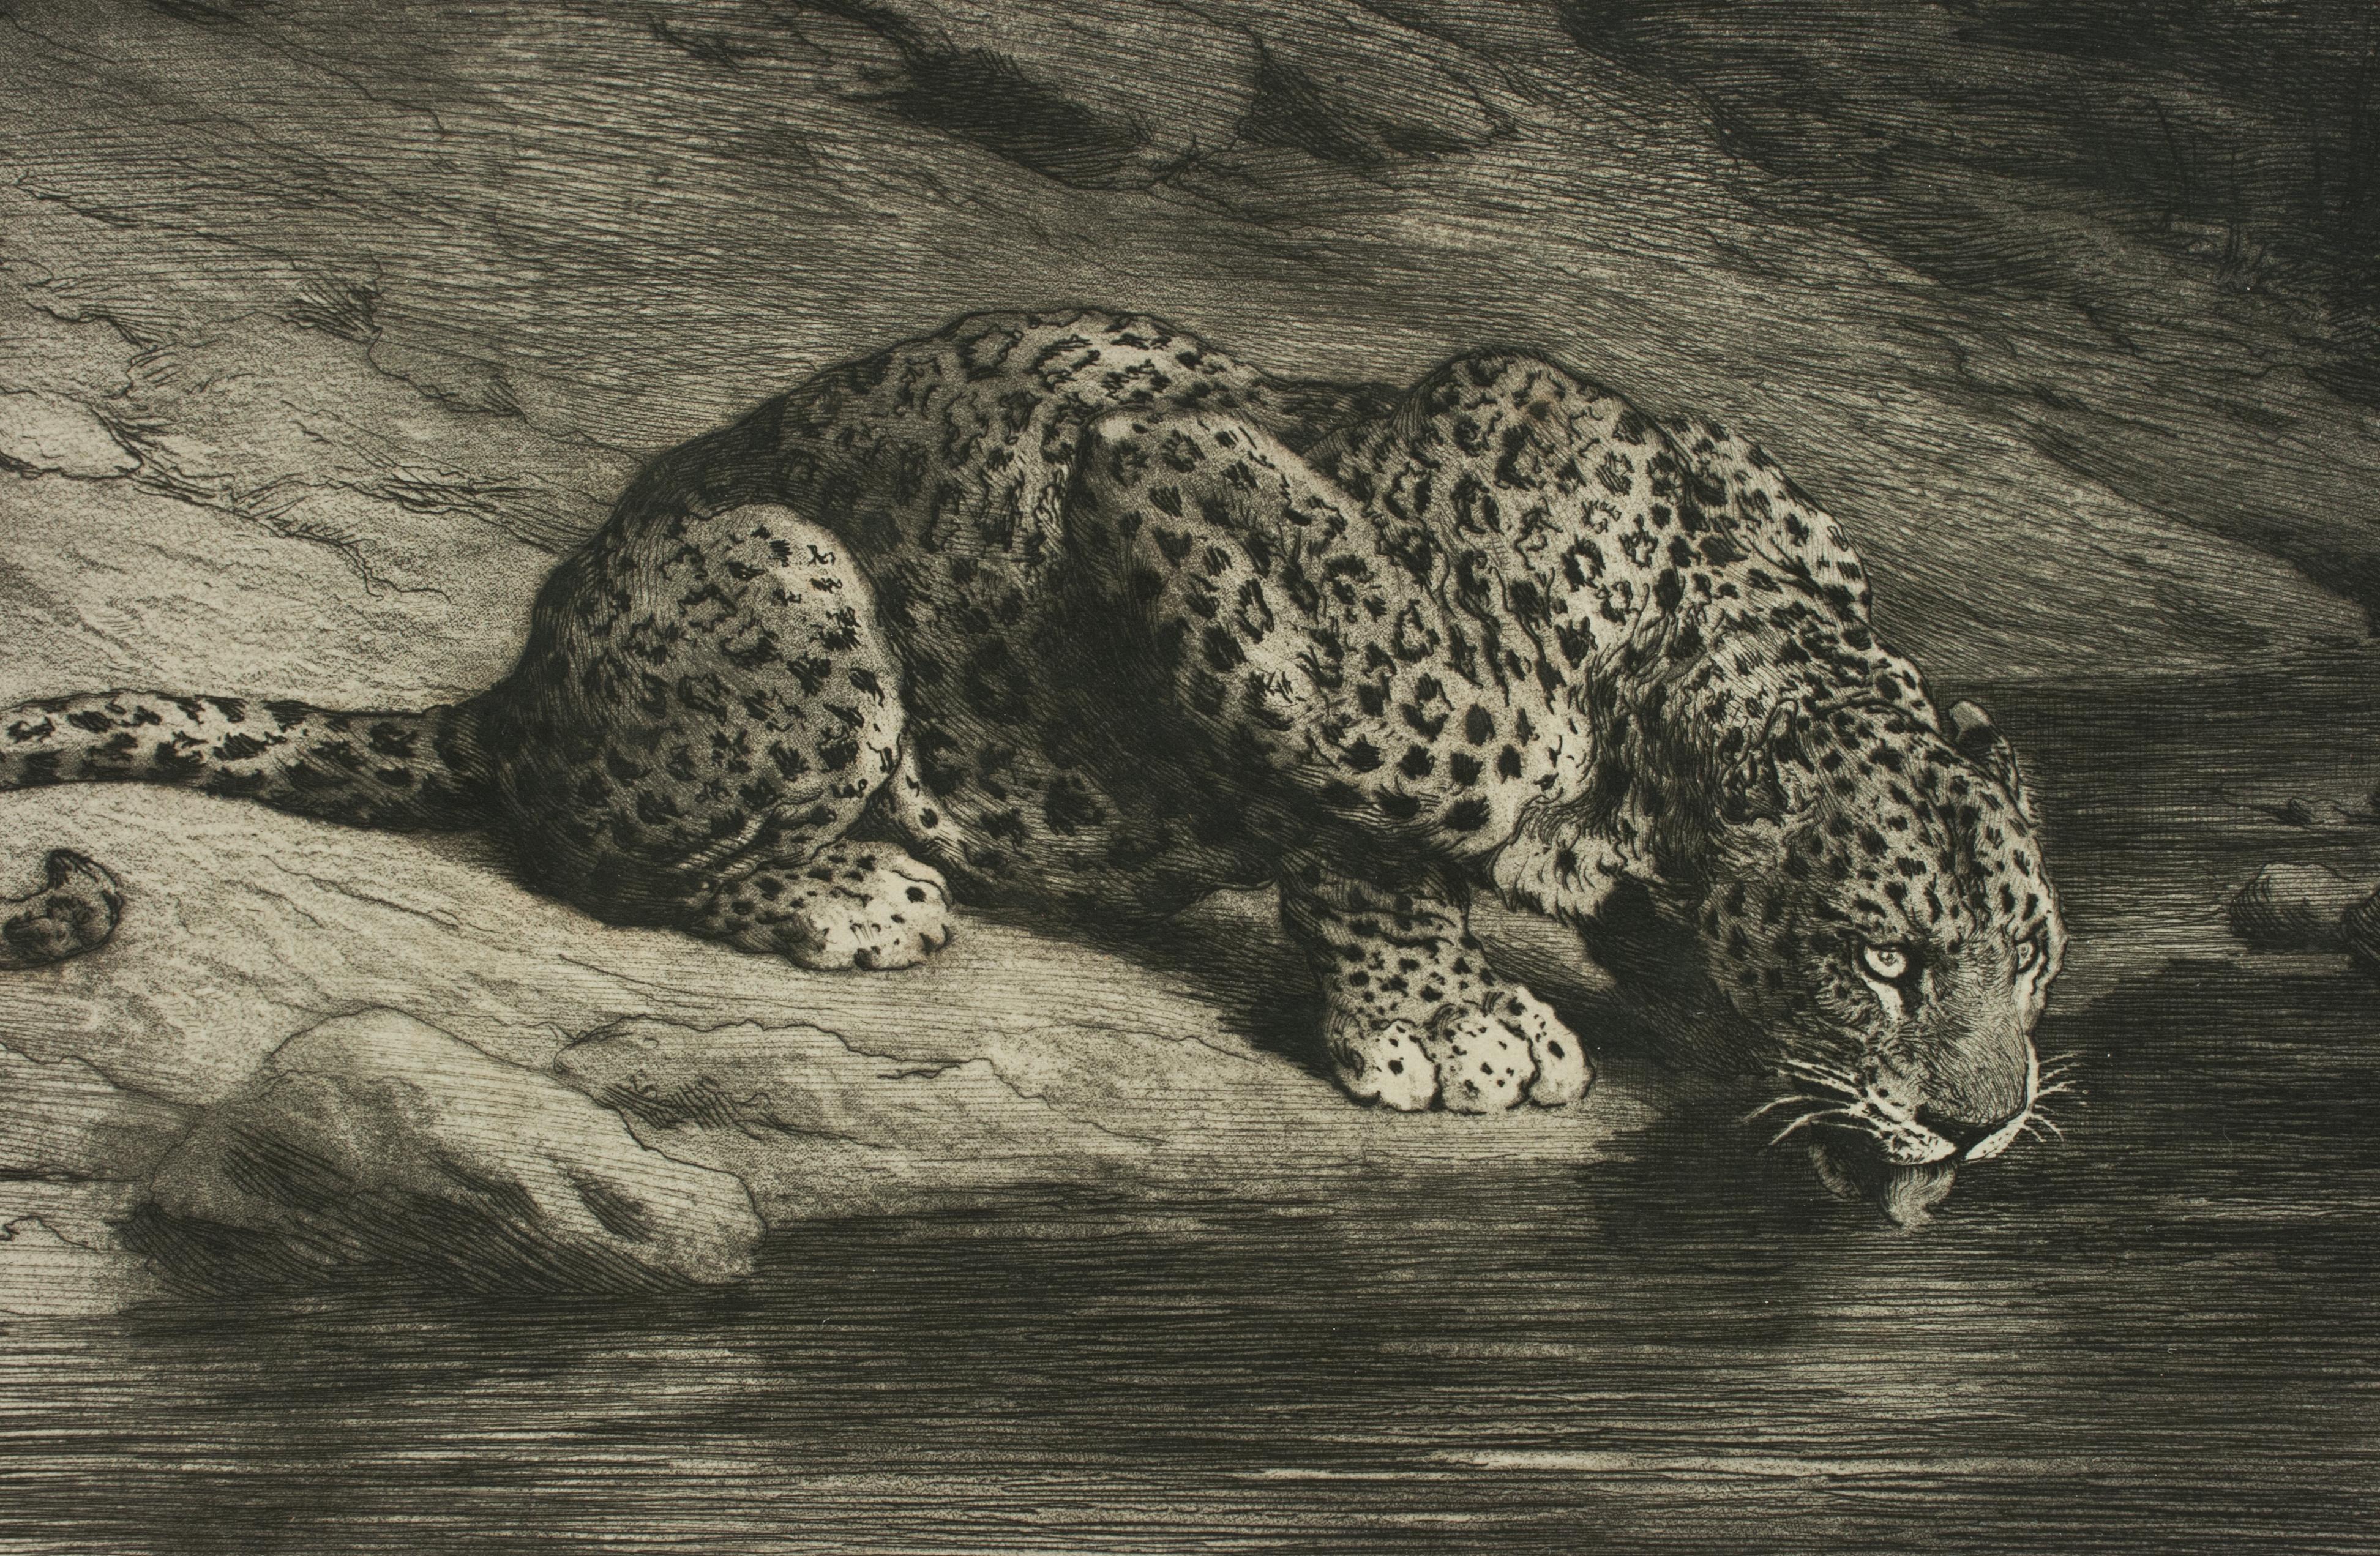 20th Century Leopard Drinking from the River by Herbert Dicksee, Drinking at the Waters Edge 